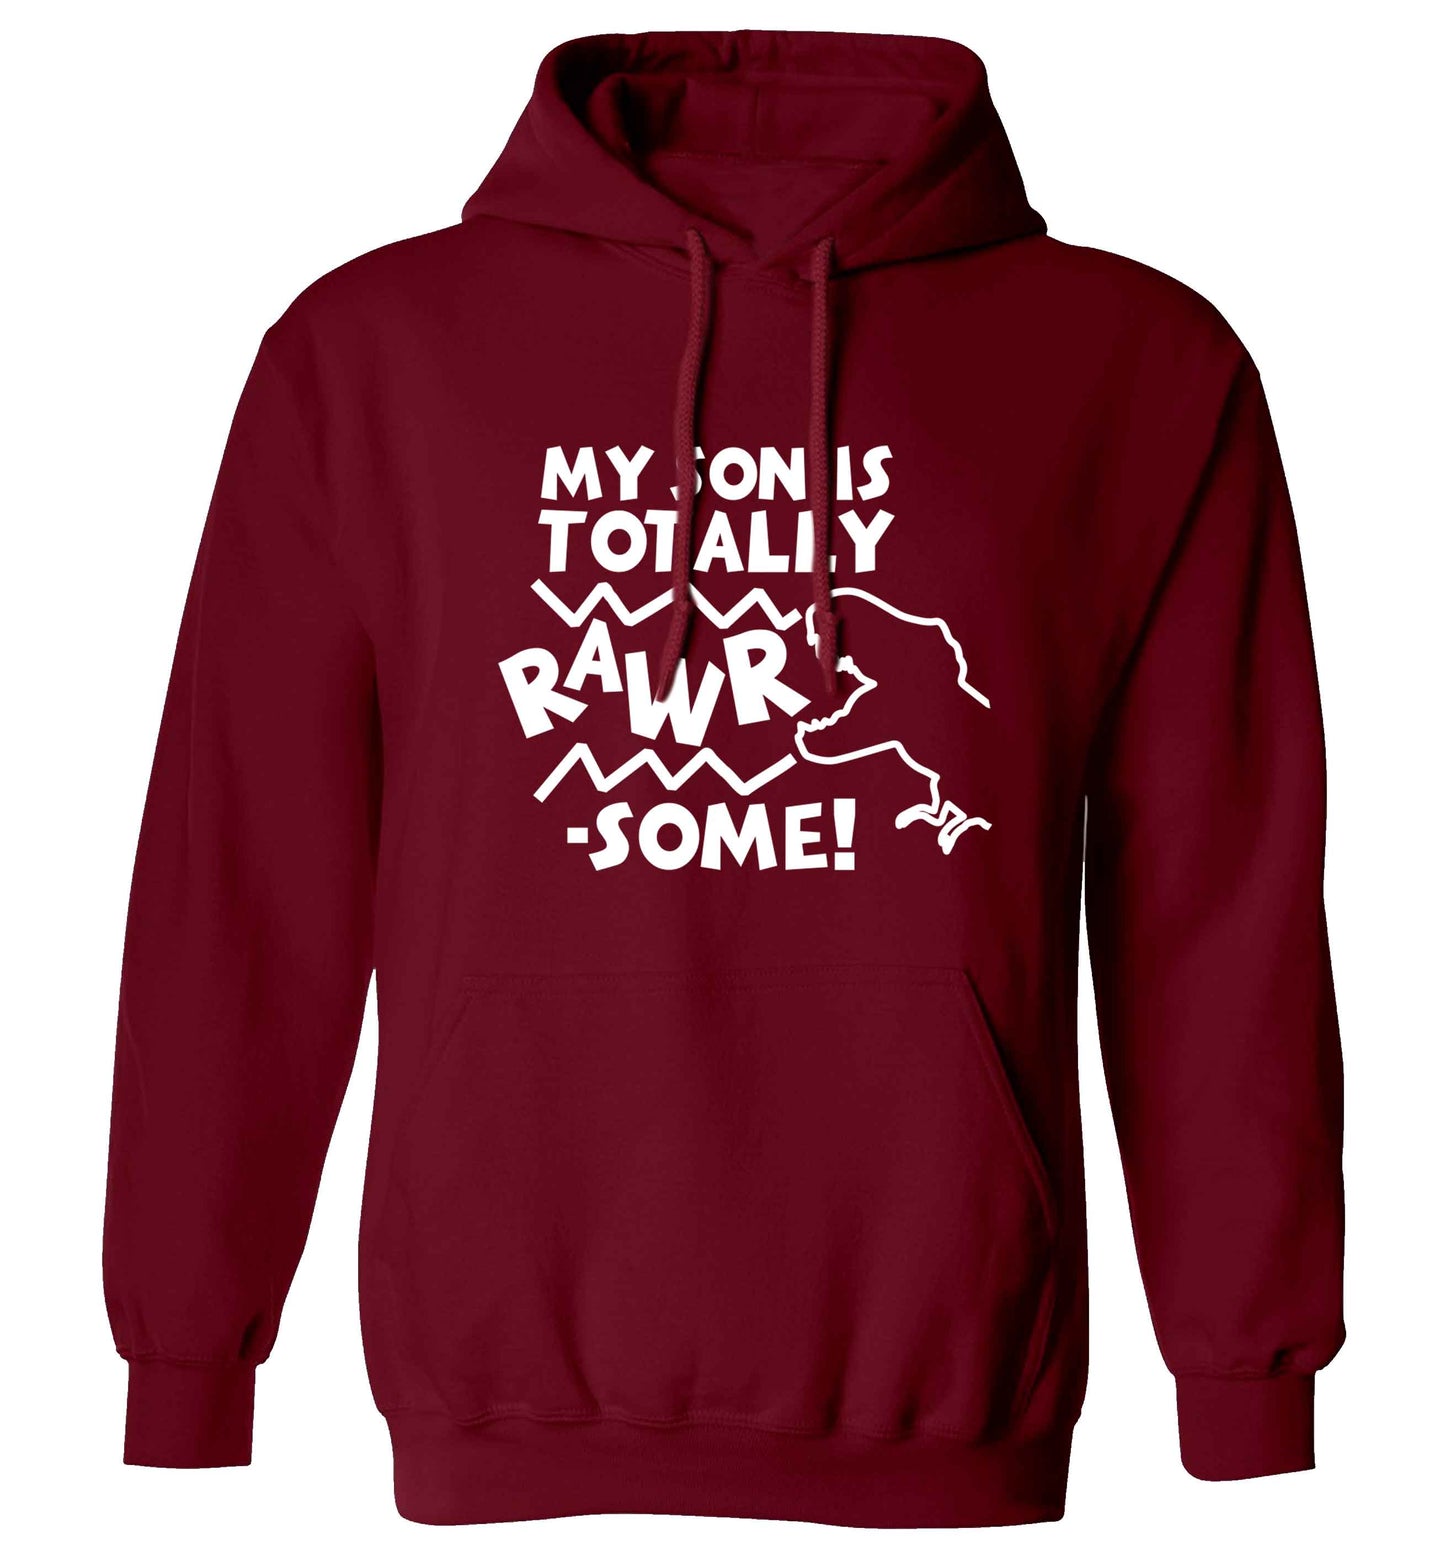 My son is totally rawrsome adults unisex maroon hoodie 2XL